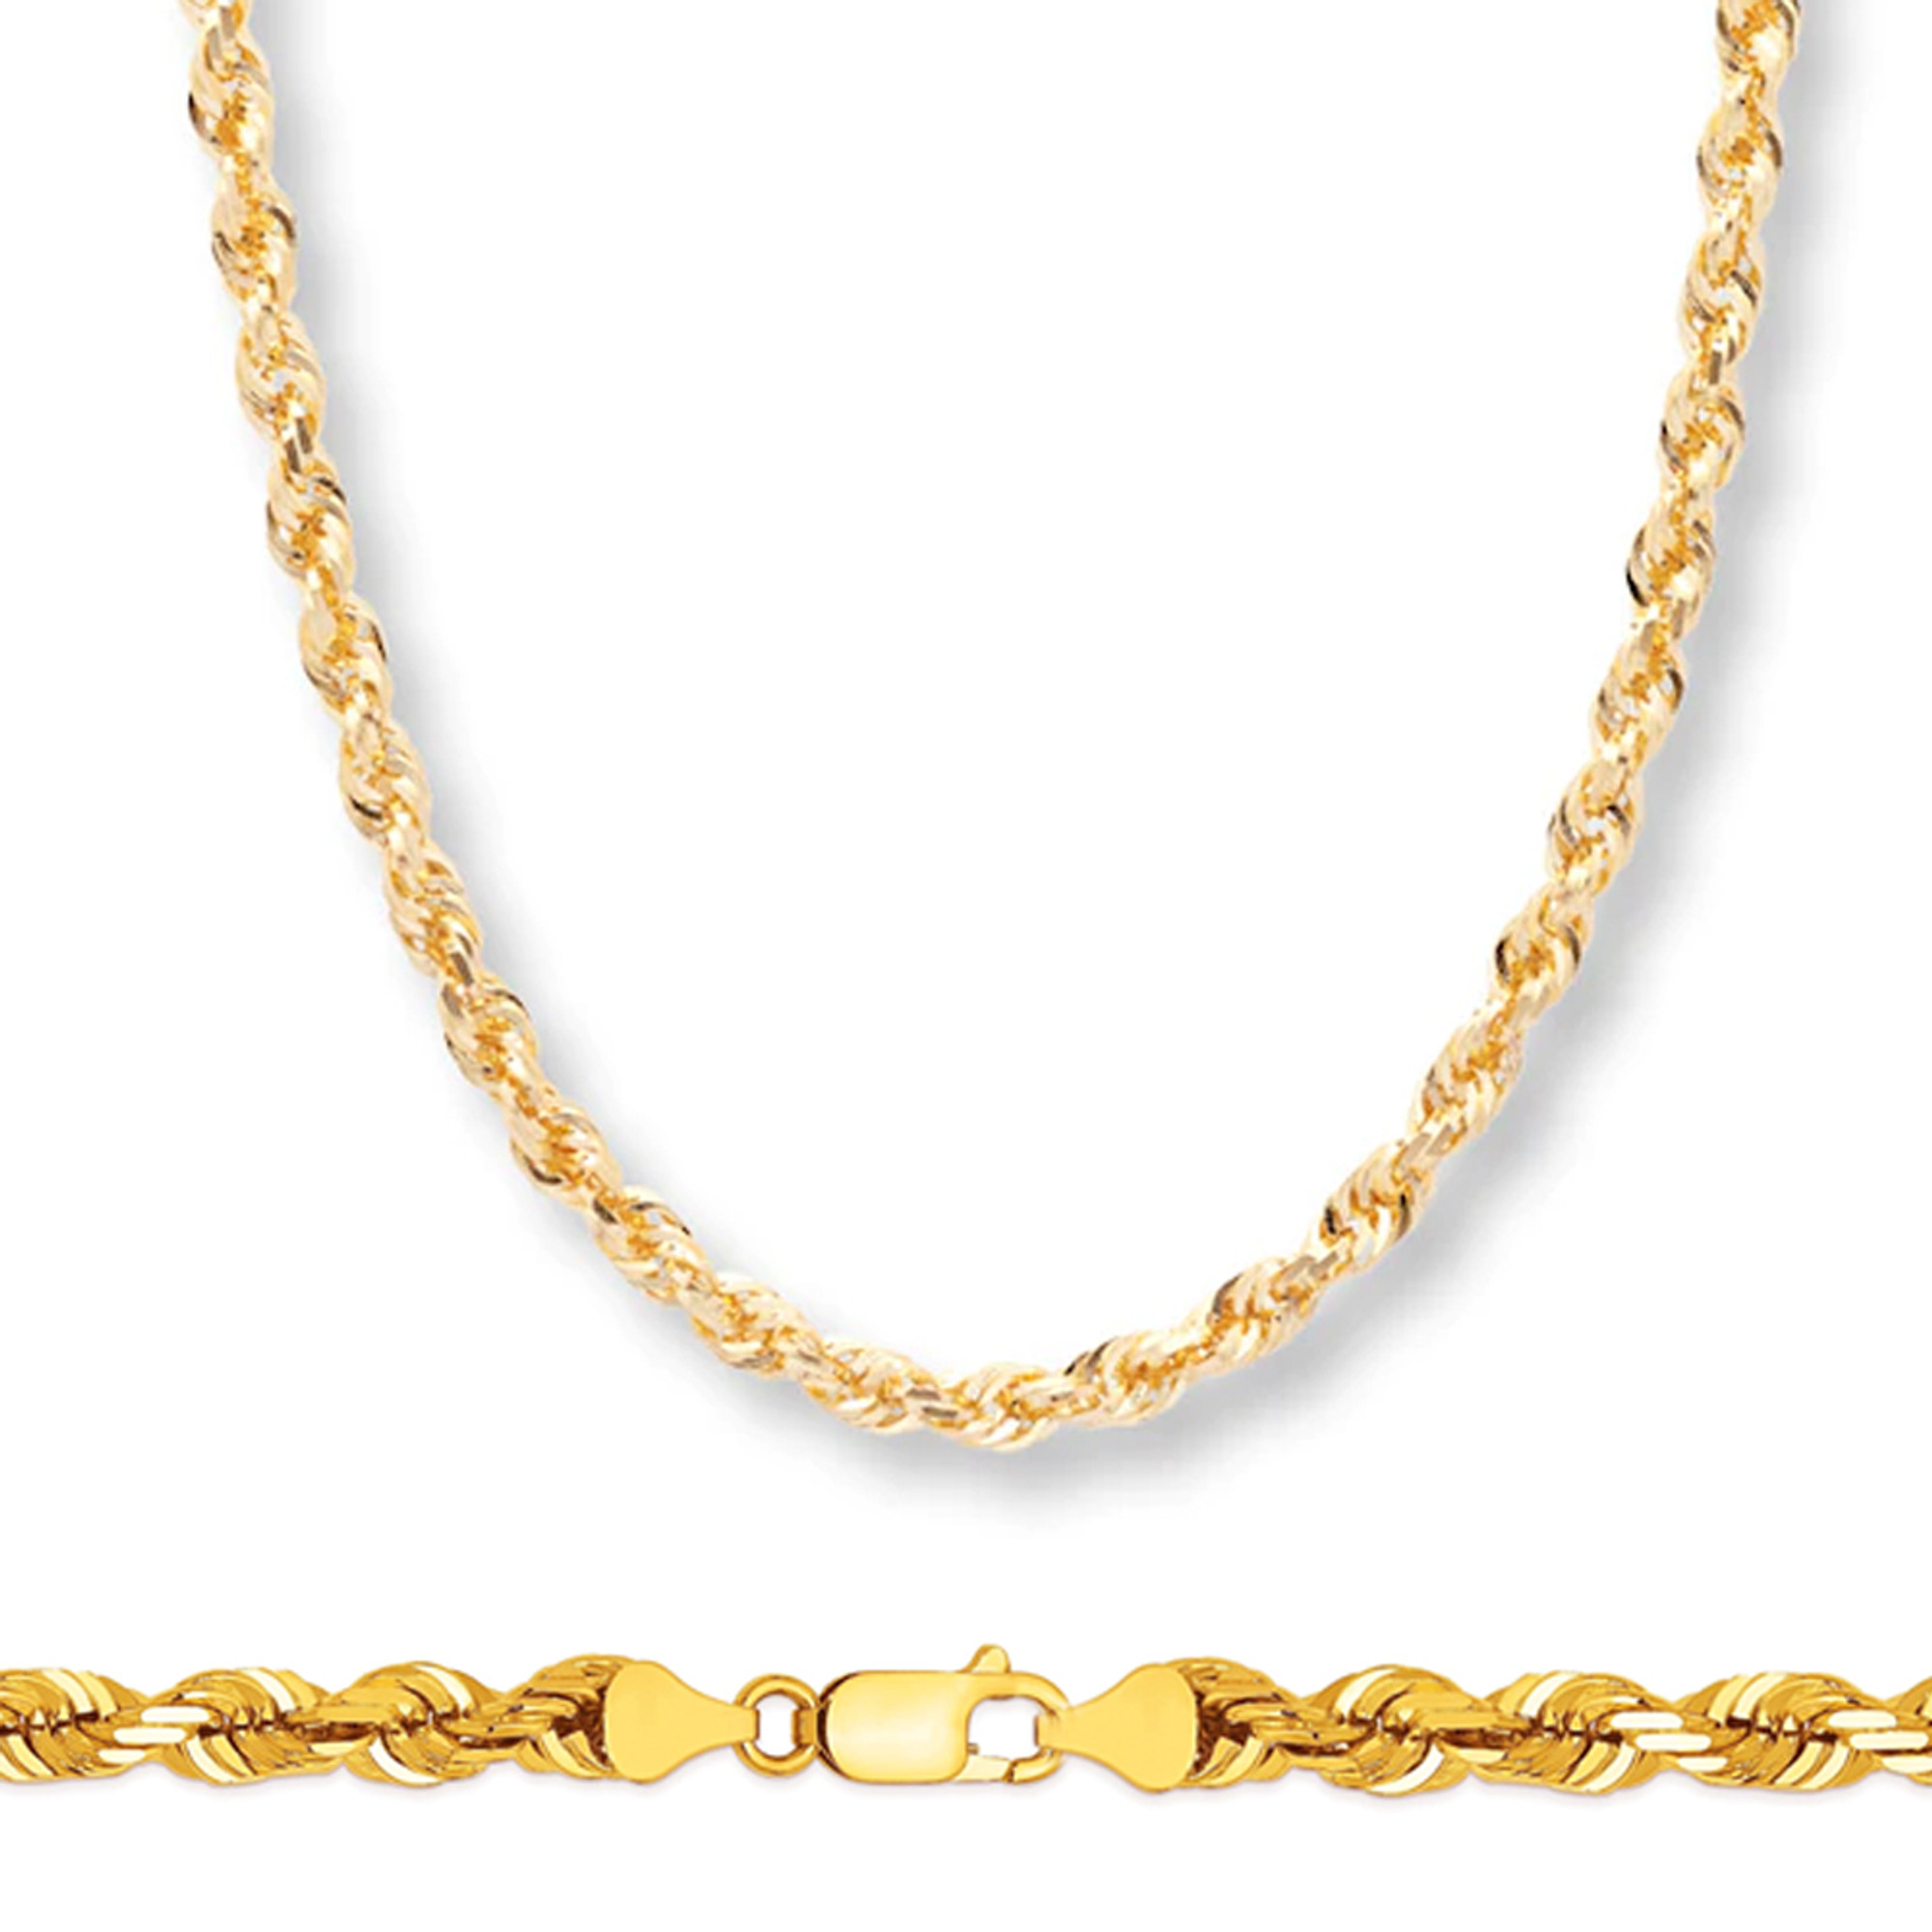 Solid 18K Gold Chain Genuine Solid 18K Gold Wheat Cable Chain Diamond Cut  18K Rose Gold Chain 18K White Gold Chain 